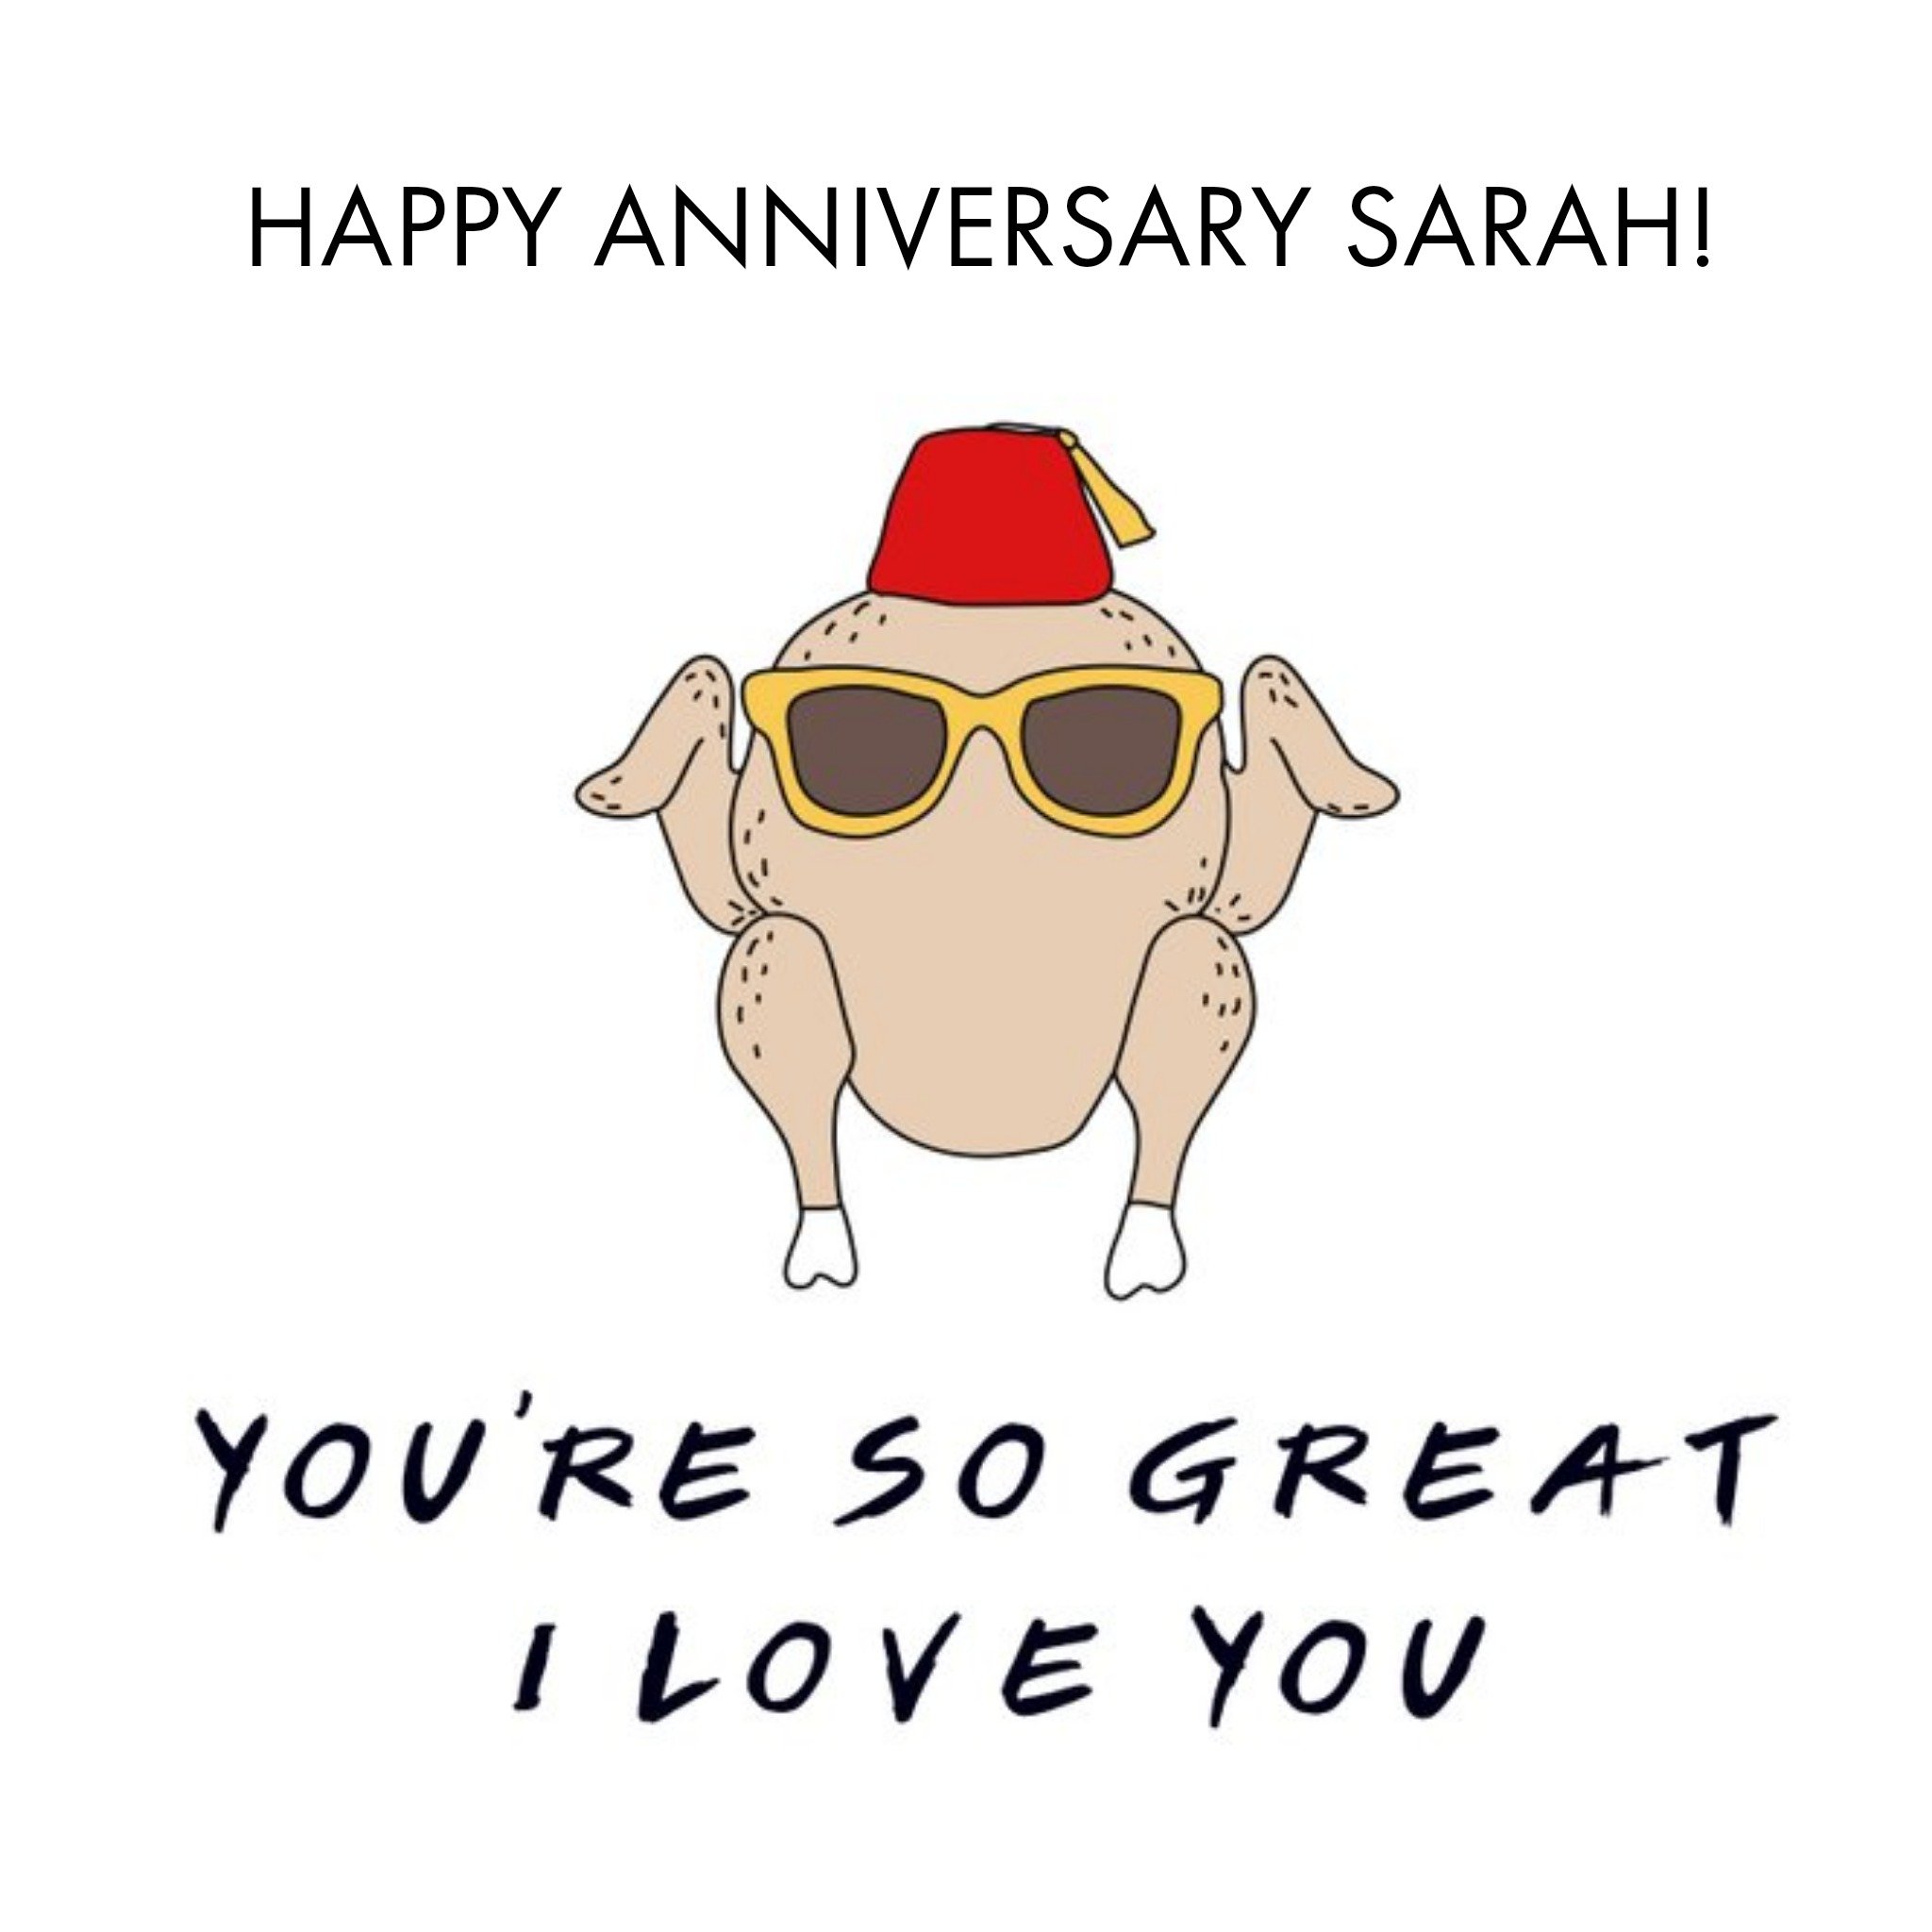 Friends (Tv Show) Friends Tv You're So Great I Love You Anniversary Card, Square